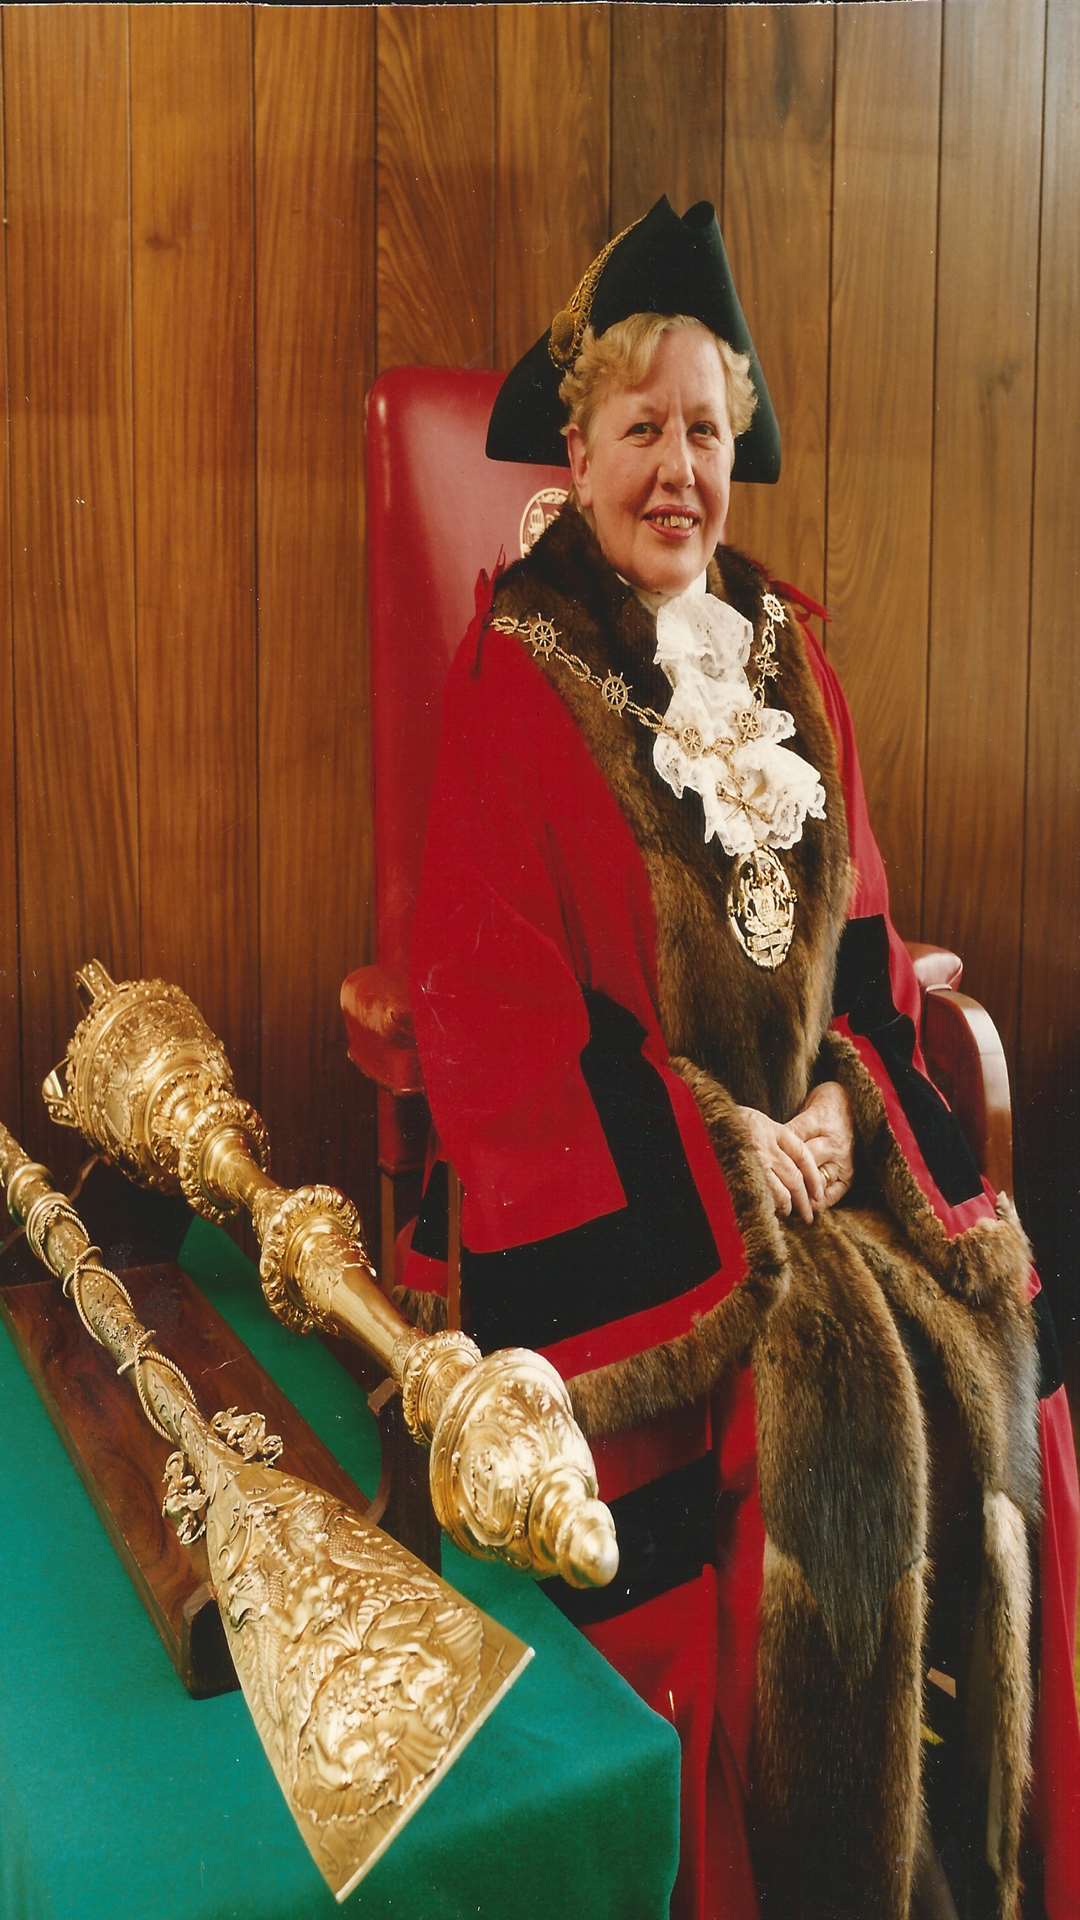 Lady Murray was made mayor of Gravesham in 1995